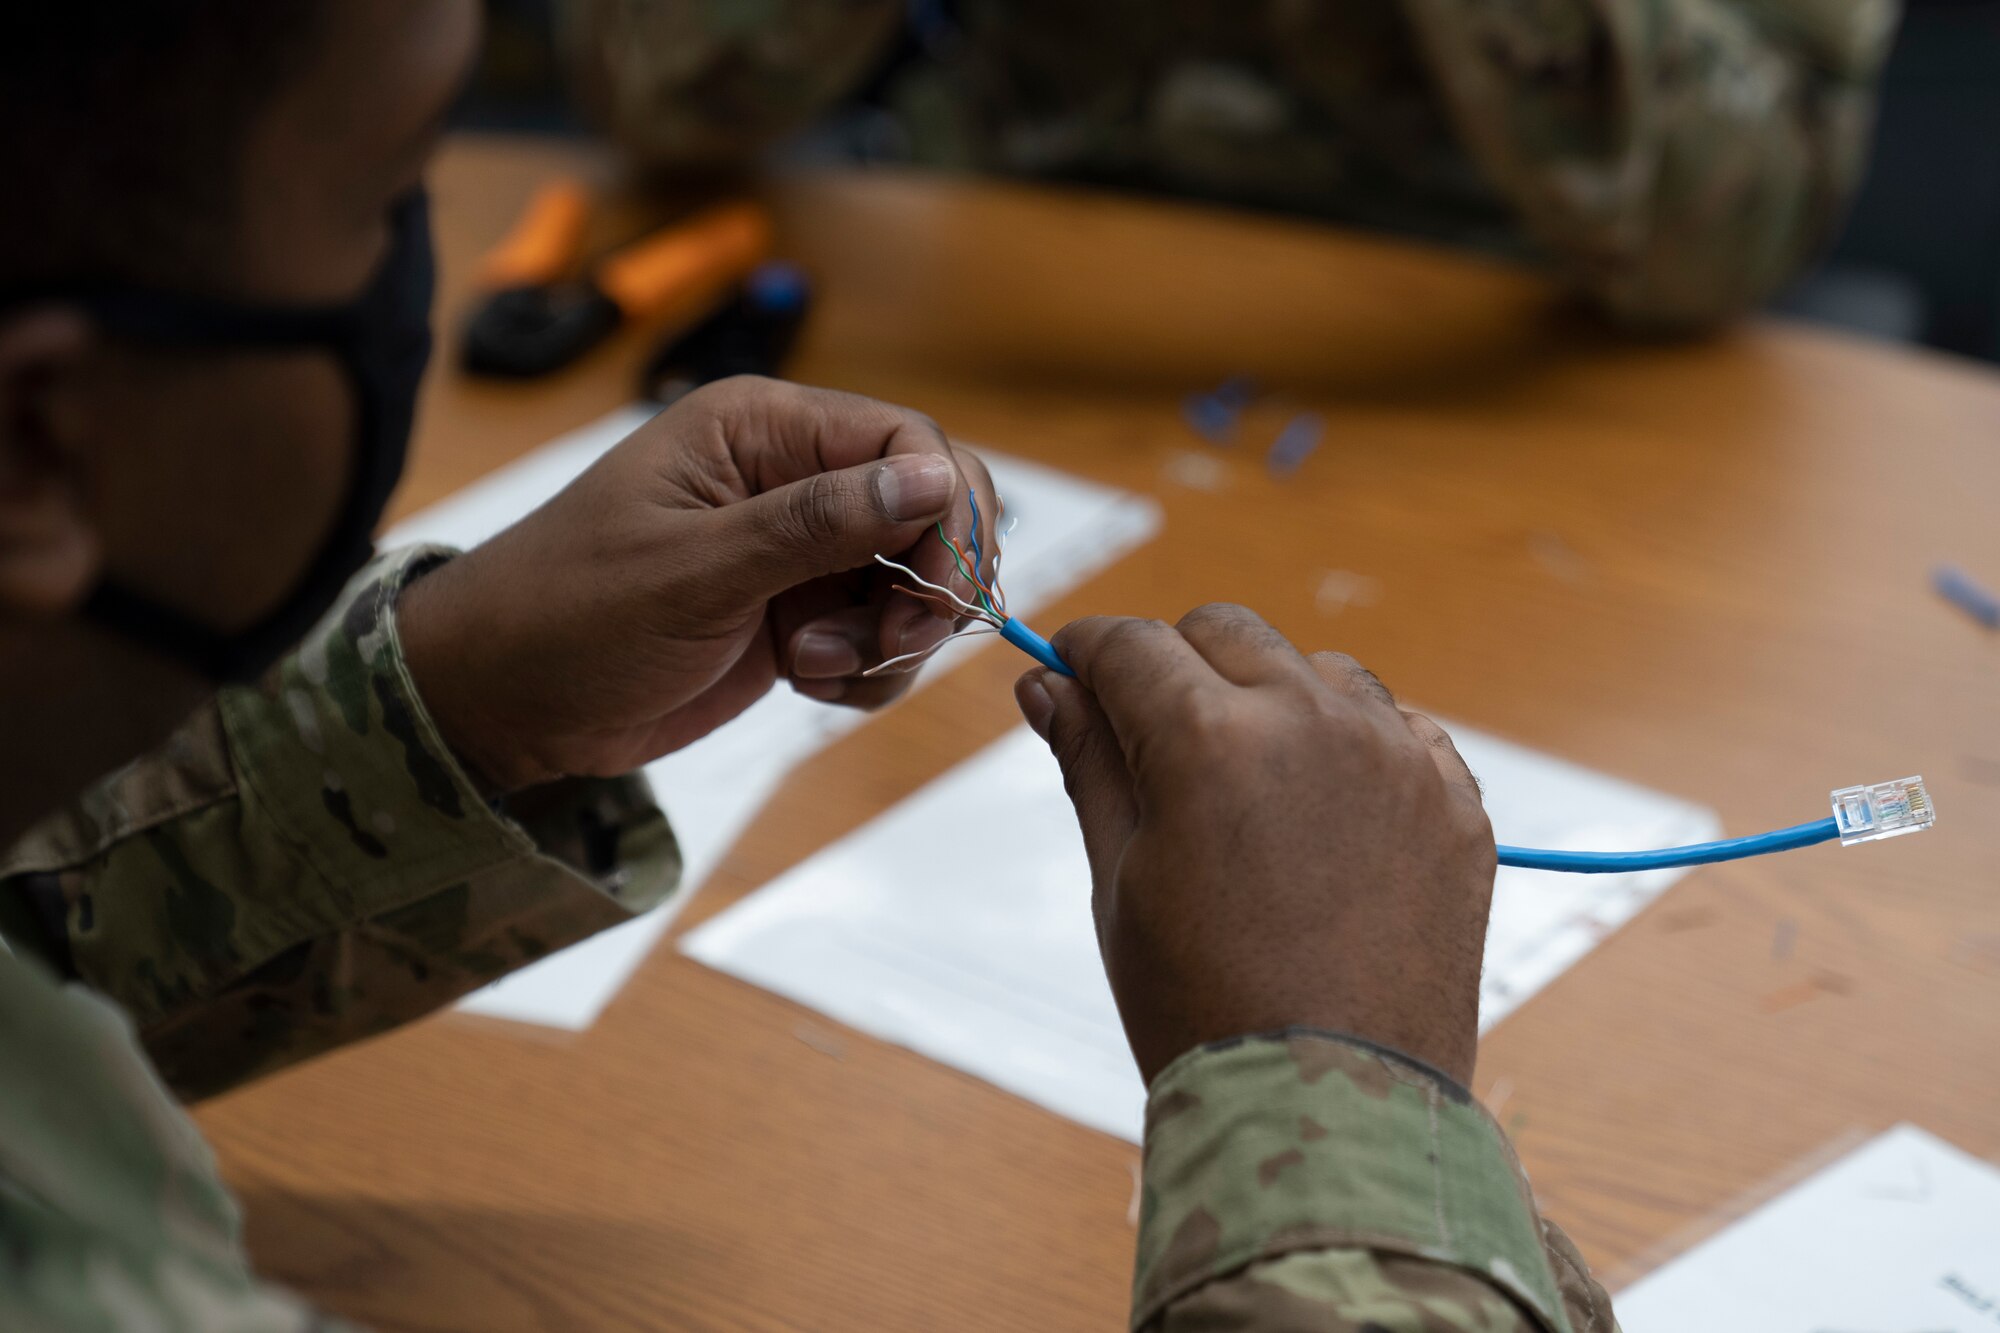 U.S. Air Force Tech. Sgt. Jermaine Miles, 338th Training Squadron instructor, demonstrates how to make an ethernet cable in Bryan Hall at Keesler Air Force Base, Mississippi, on Jan. 26, 2021. The 338th TRS has been working towards a modular curriculum, which enables students to receive the training tailored to their future assignment, for approximately five years. (U.S. Air Force photo by Airman 1st Class Kimberly L. Mueller)